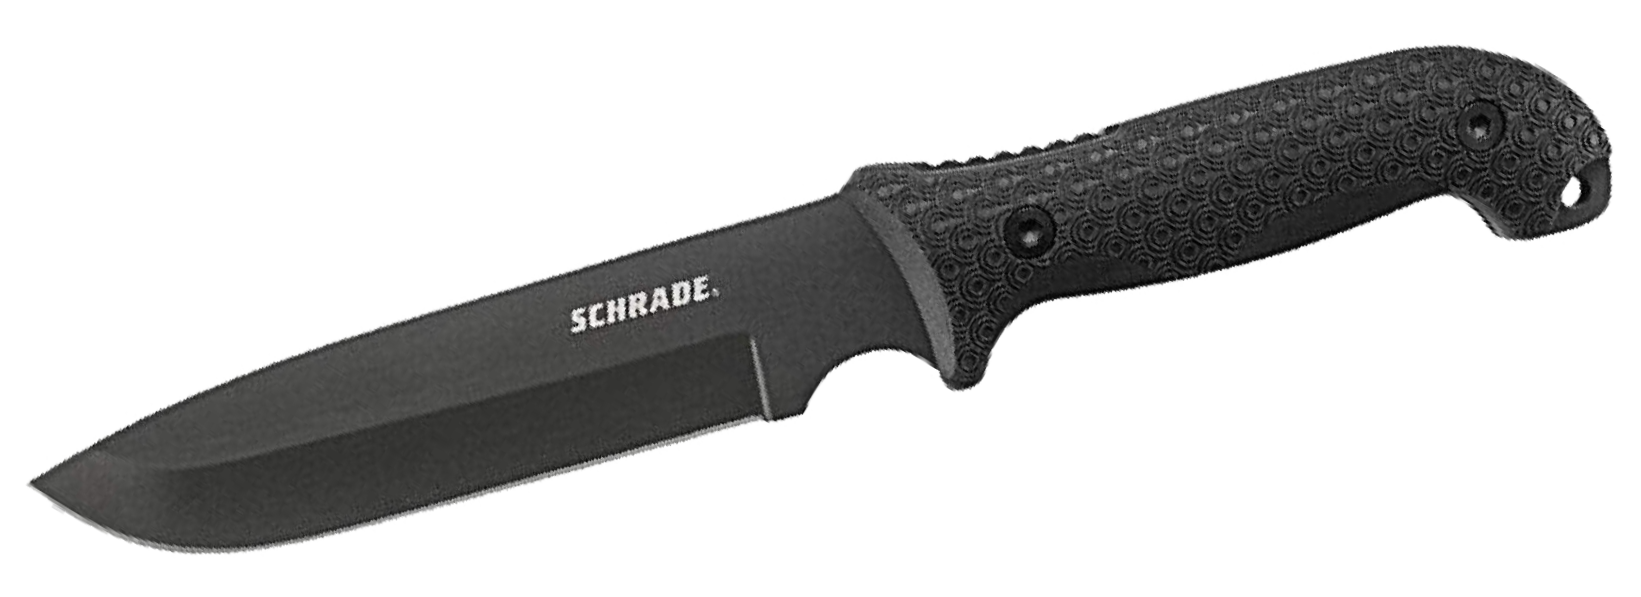 Schrade schf52 frontier fixed blade survival camping knife